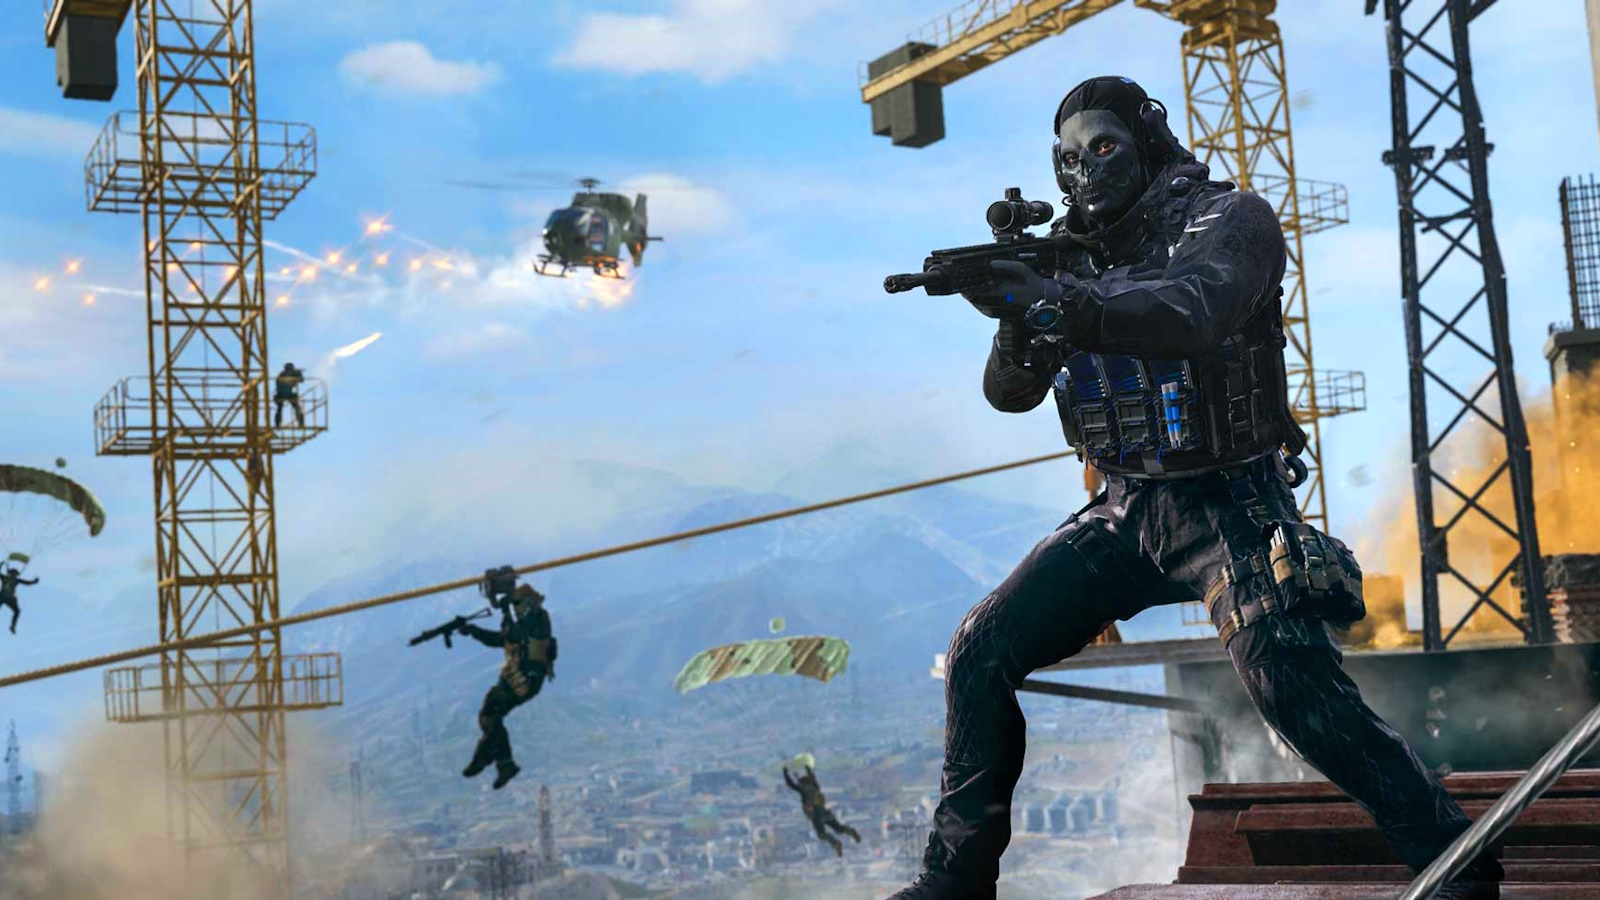 MW3 Season 1 release date, modes, and more details